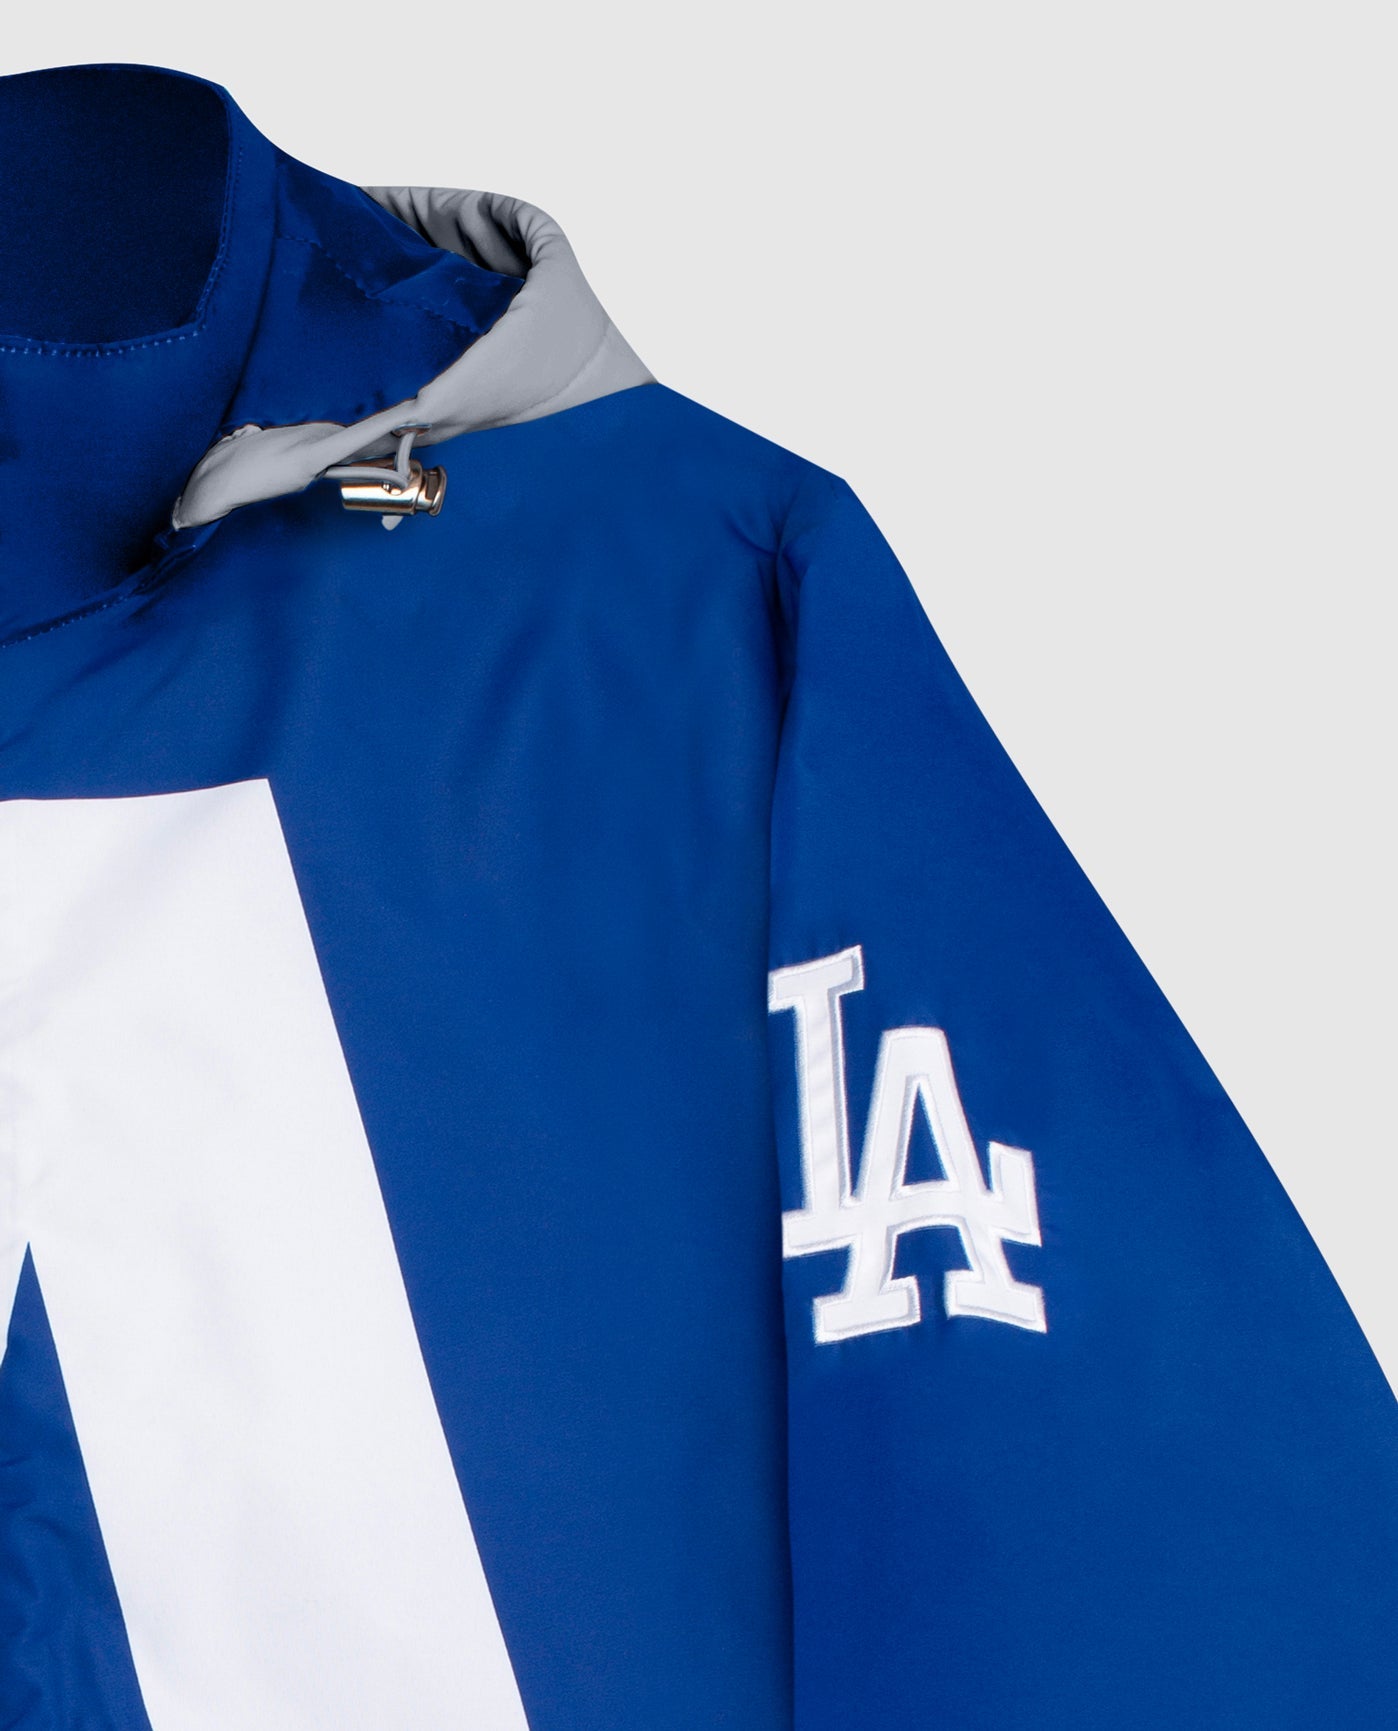 Los Angeles Dodgers Lakers And Kings Logo Shirt, hoodie, sweater